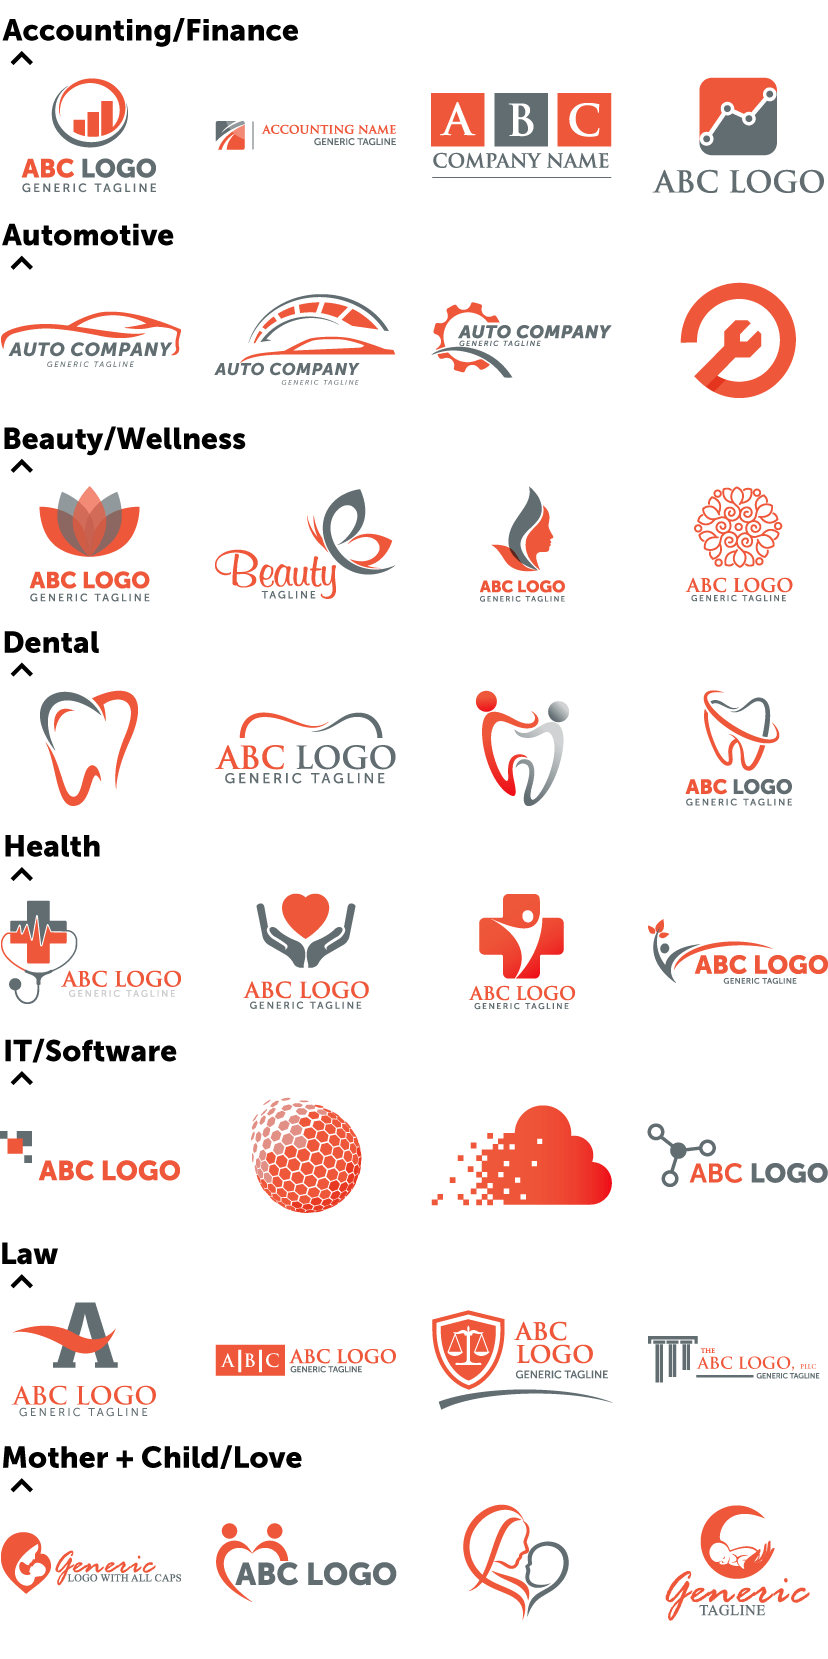 Generic Logo - Generic, common and overused logo concepts and how to avoid them ...